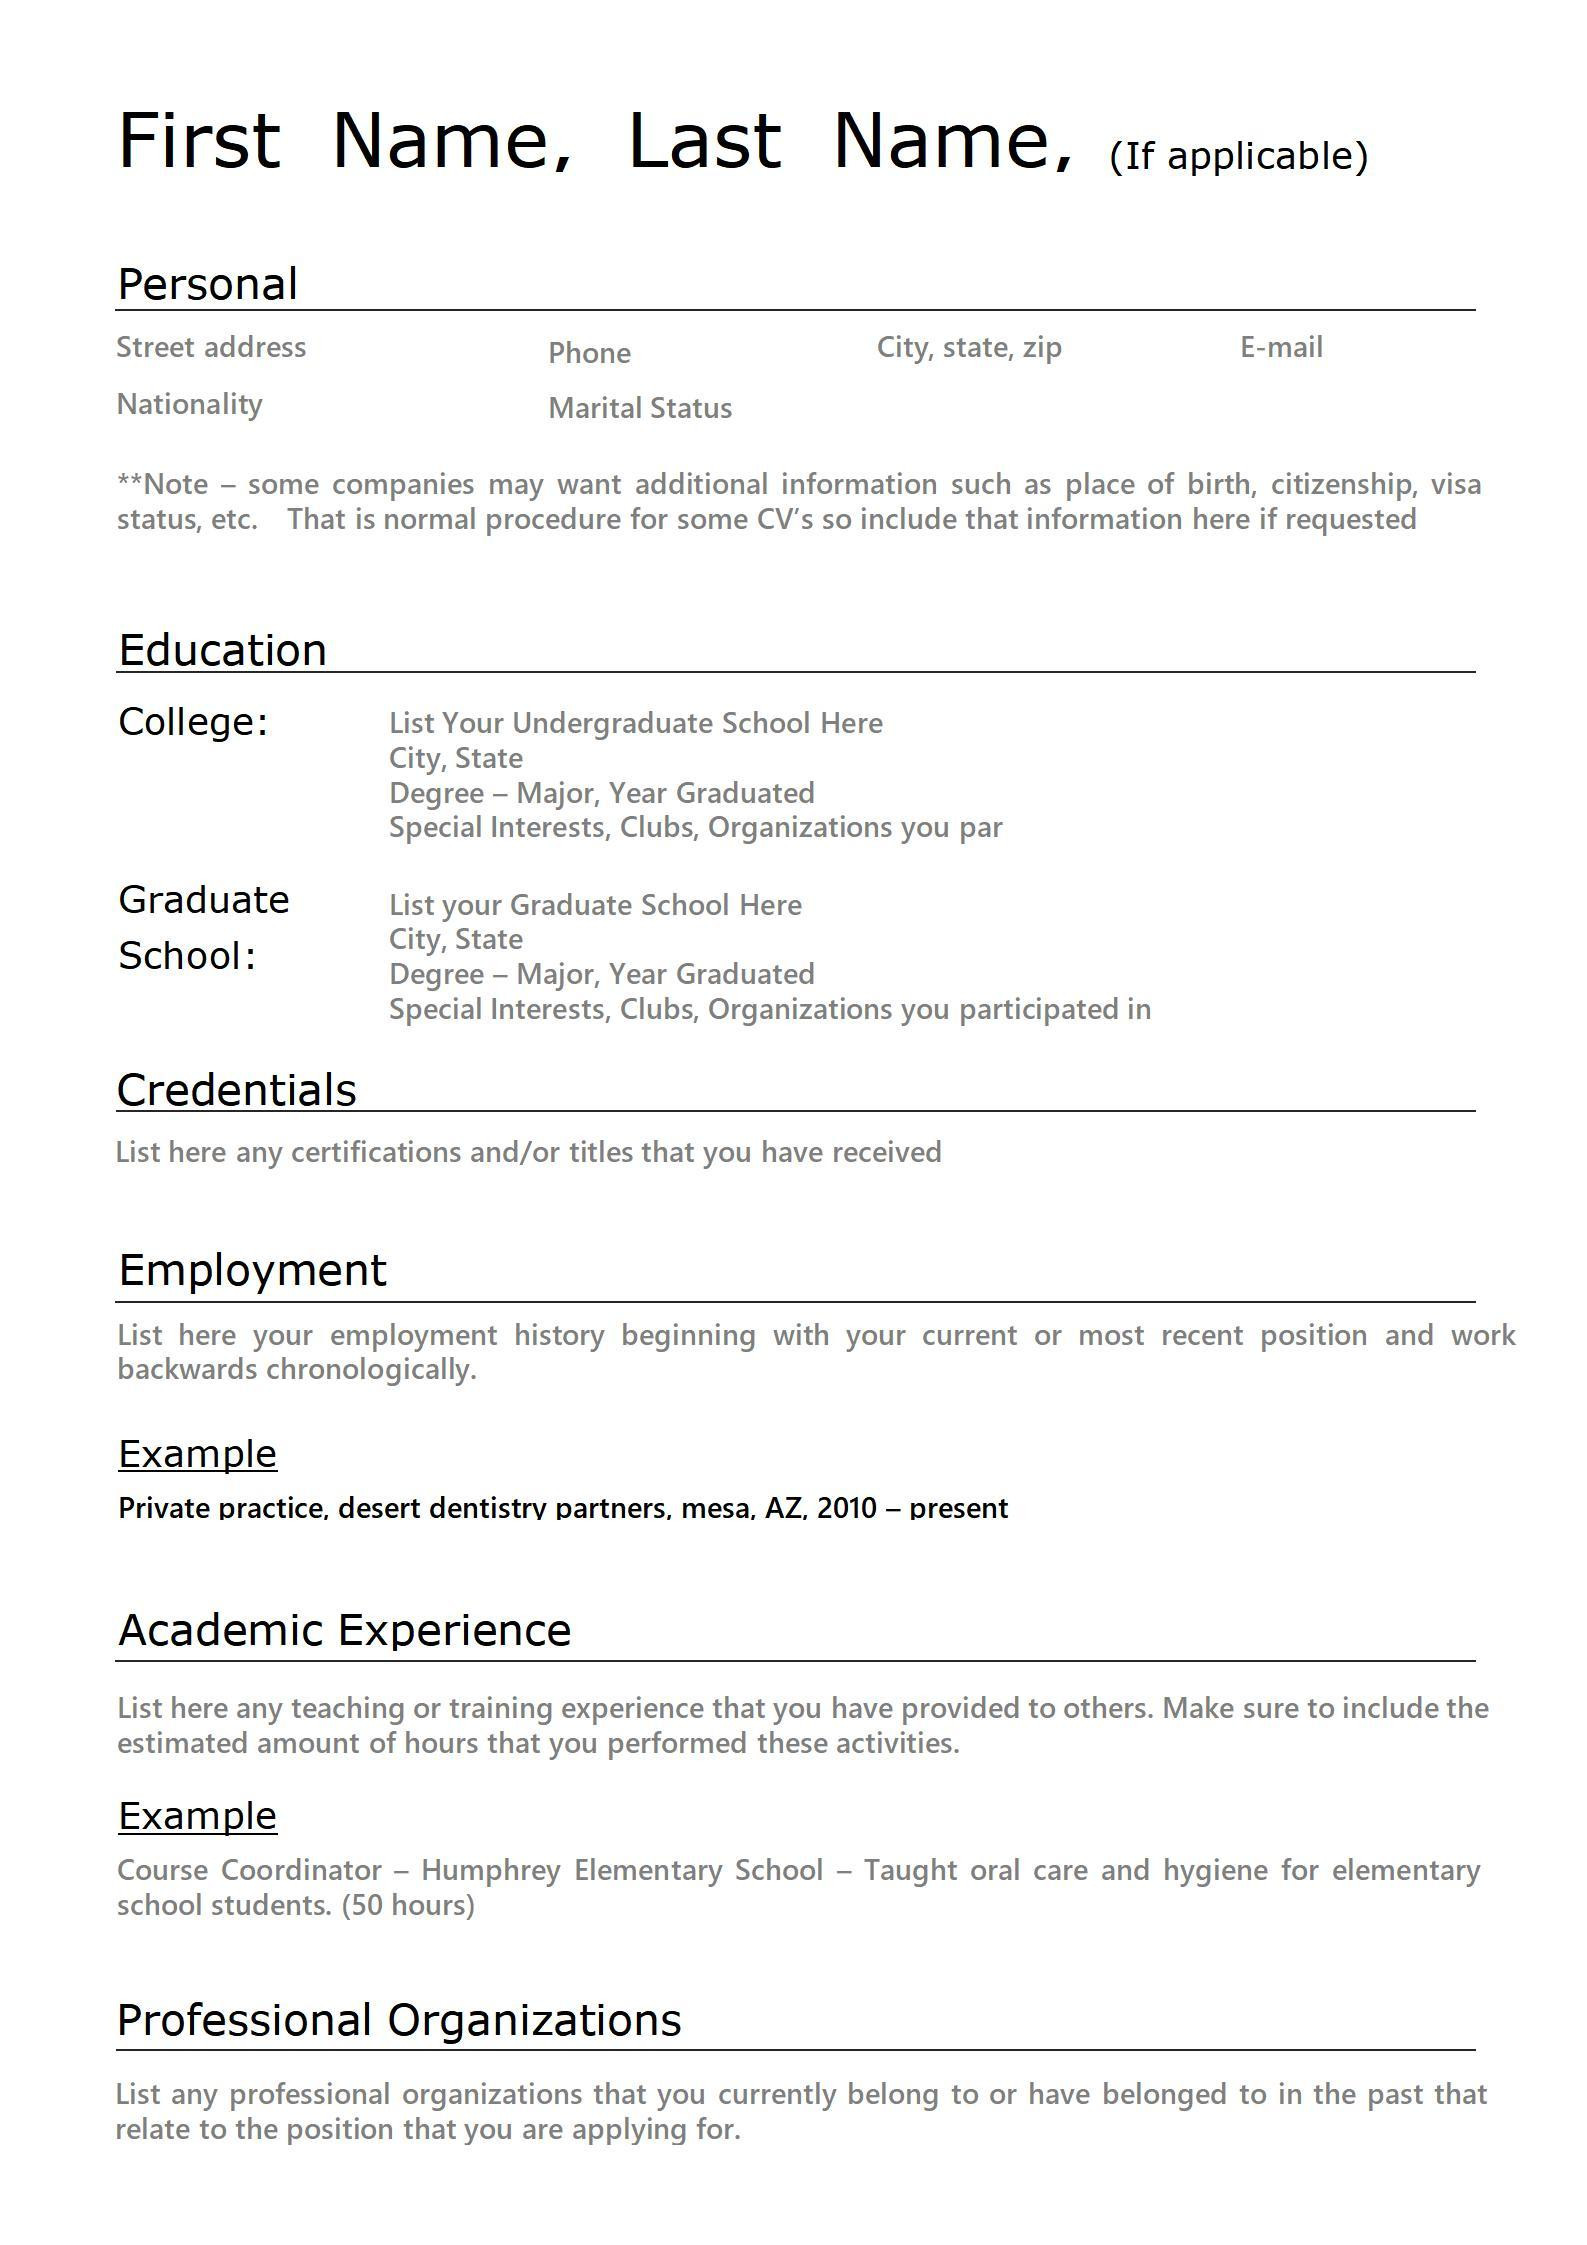 Resume for Dummies On the Job Training Sample First-time Resume with No Experience Samples Wps Office Academy